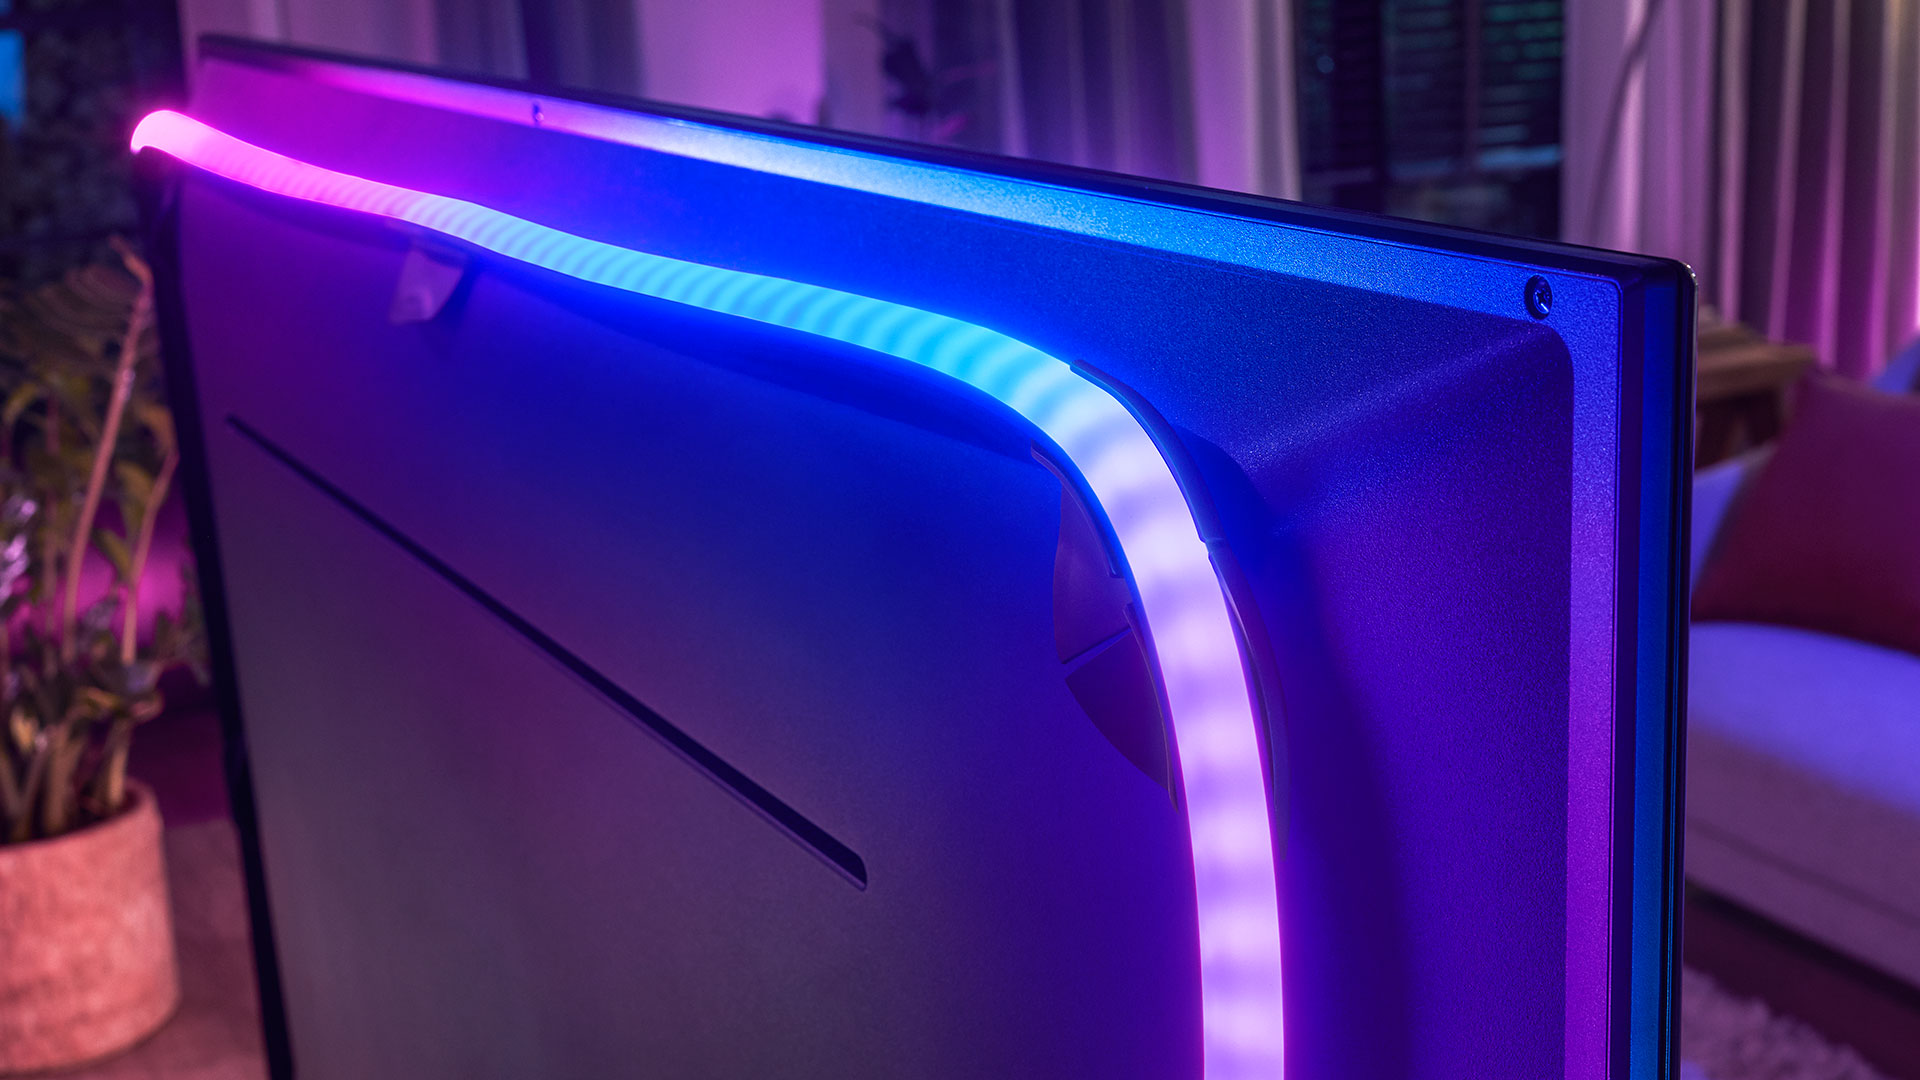 The Play Gradient will come with adhesive mounts to help buyers install the lightstrip on the back of their TVs. (Photo: Philips Hue)